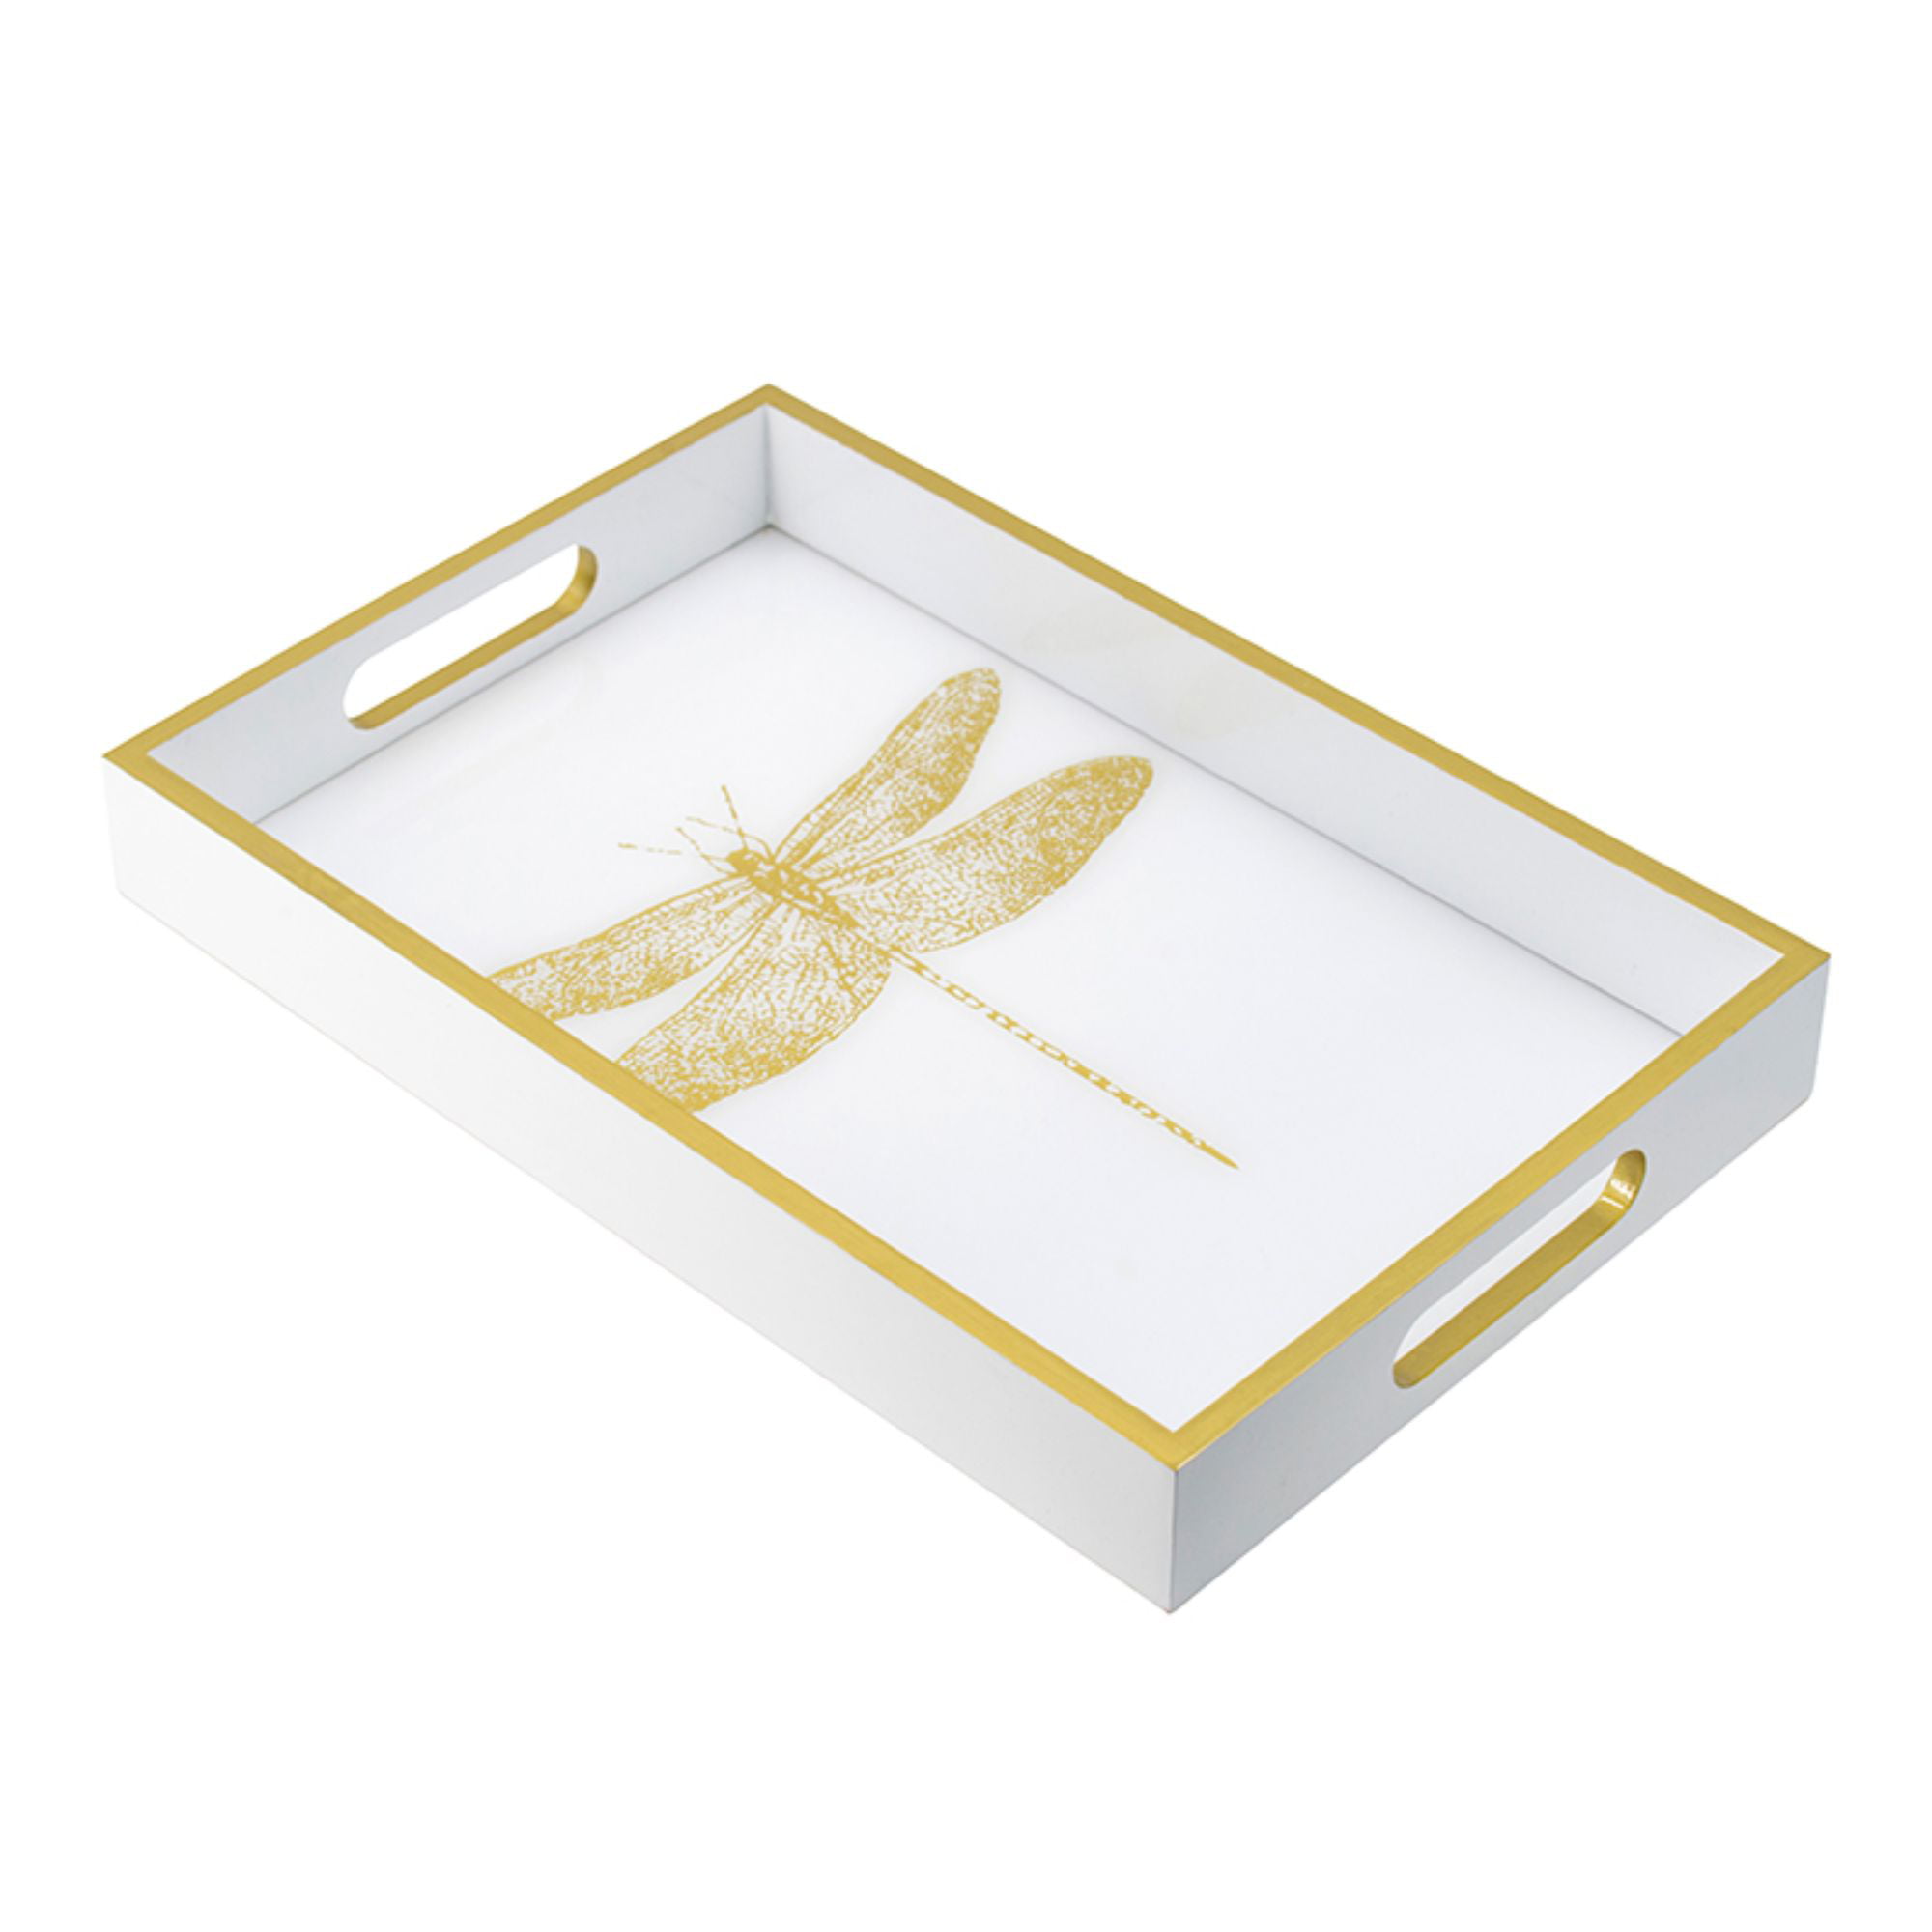 15.5" White and Gold Rectangular Dragonfly Tray with Handles